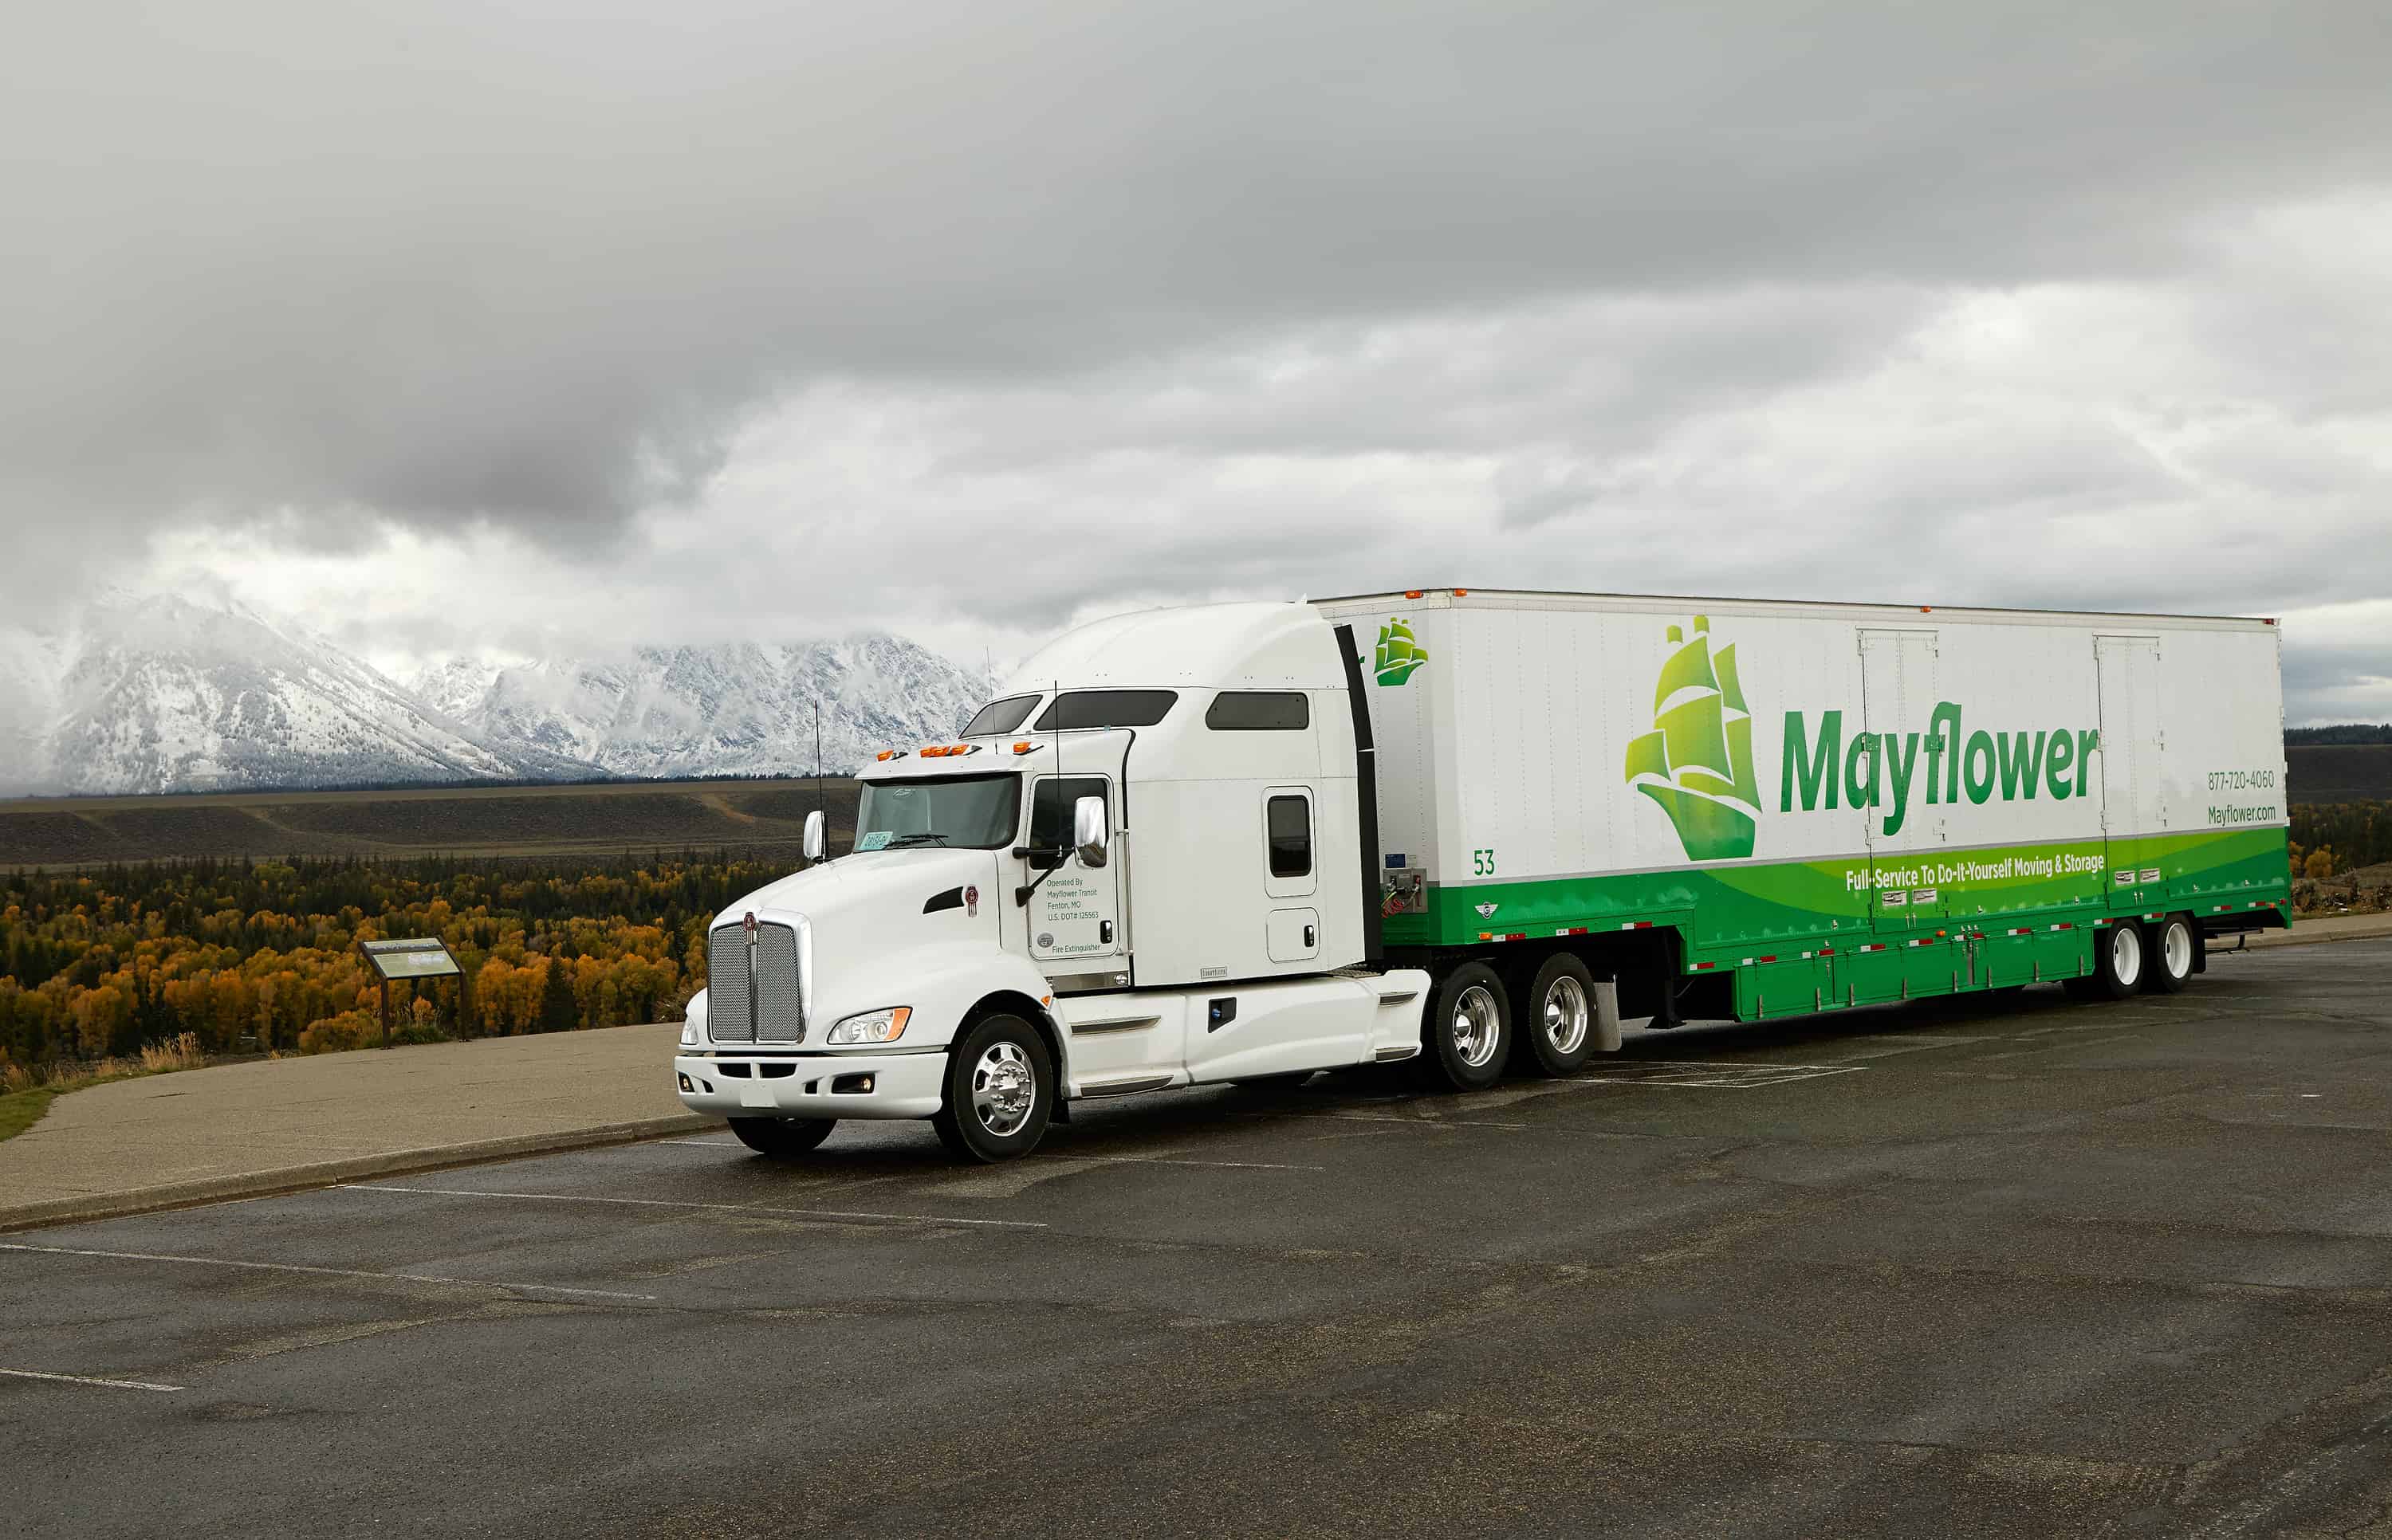 Cross Country Movers - Mayflower moving truck on highway with snowy mountains in the background - Mayflower®